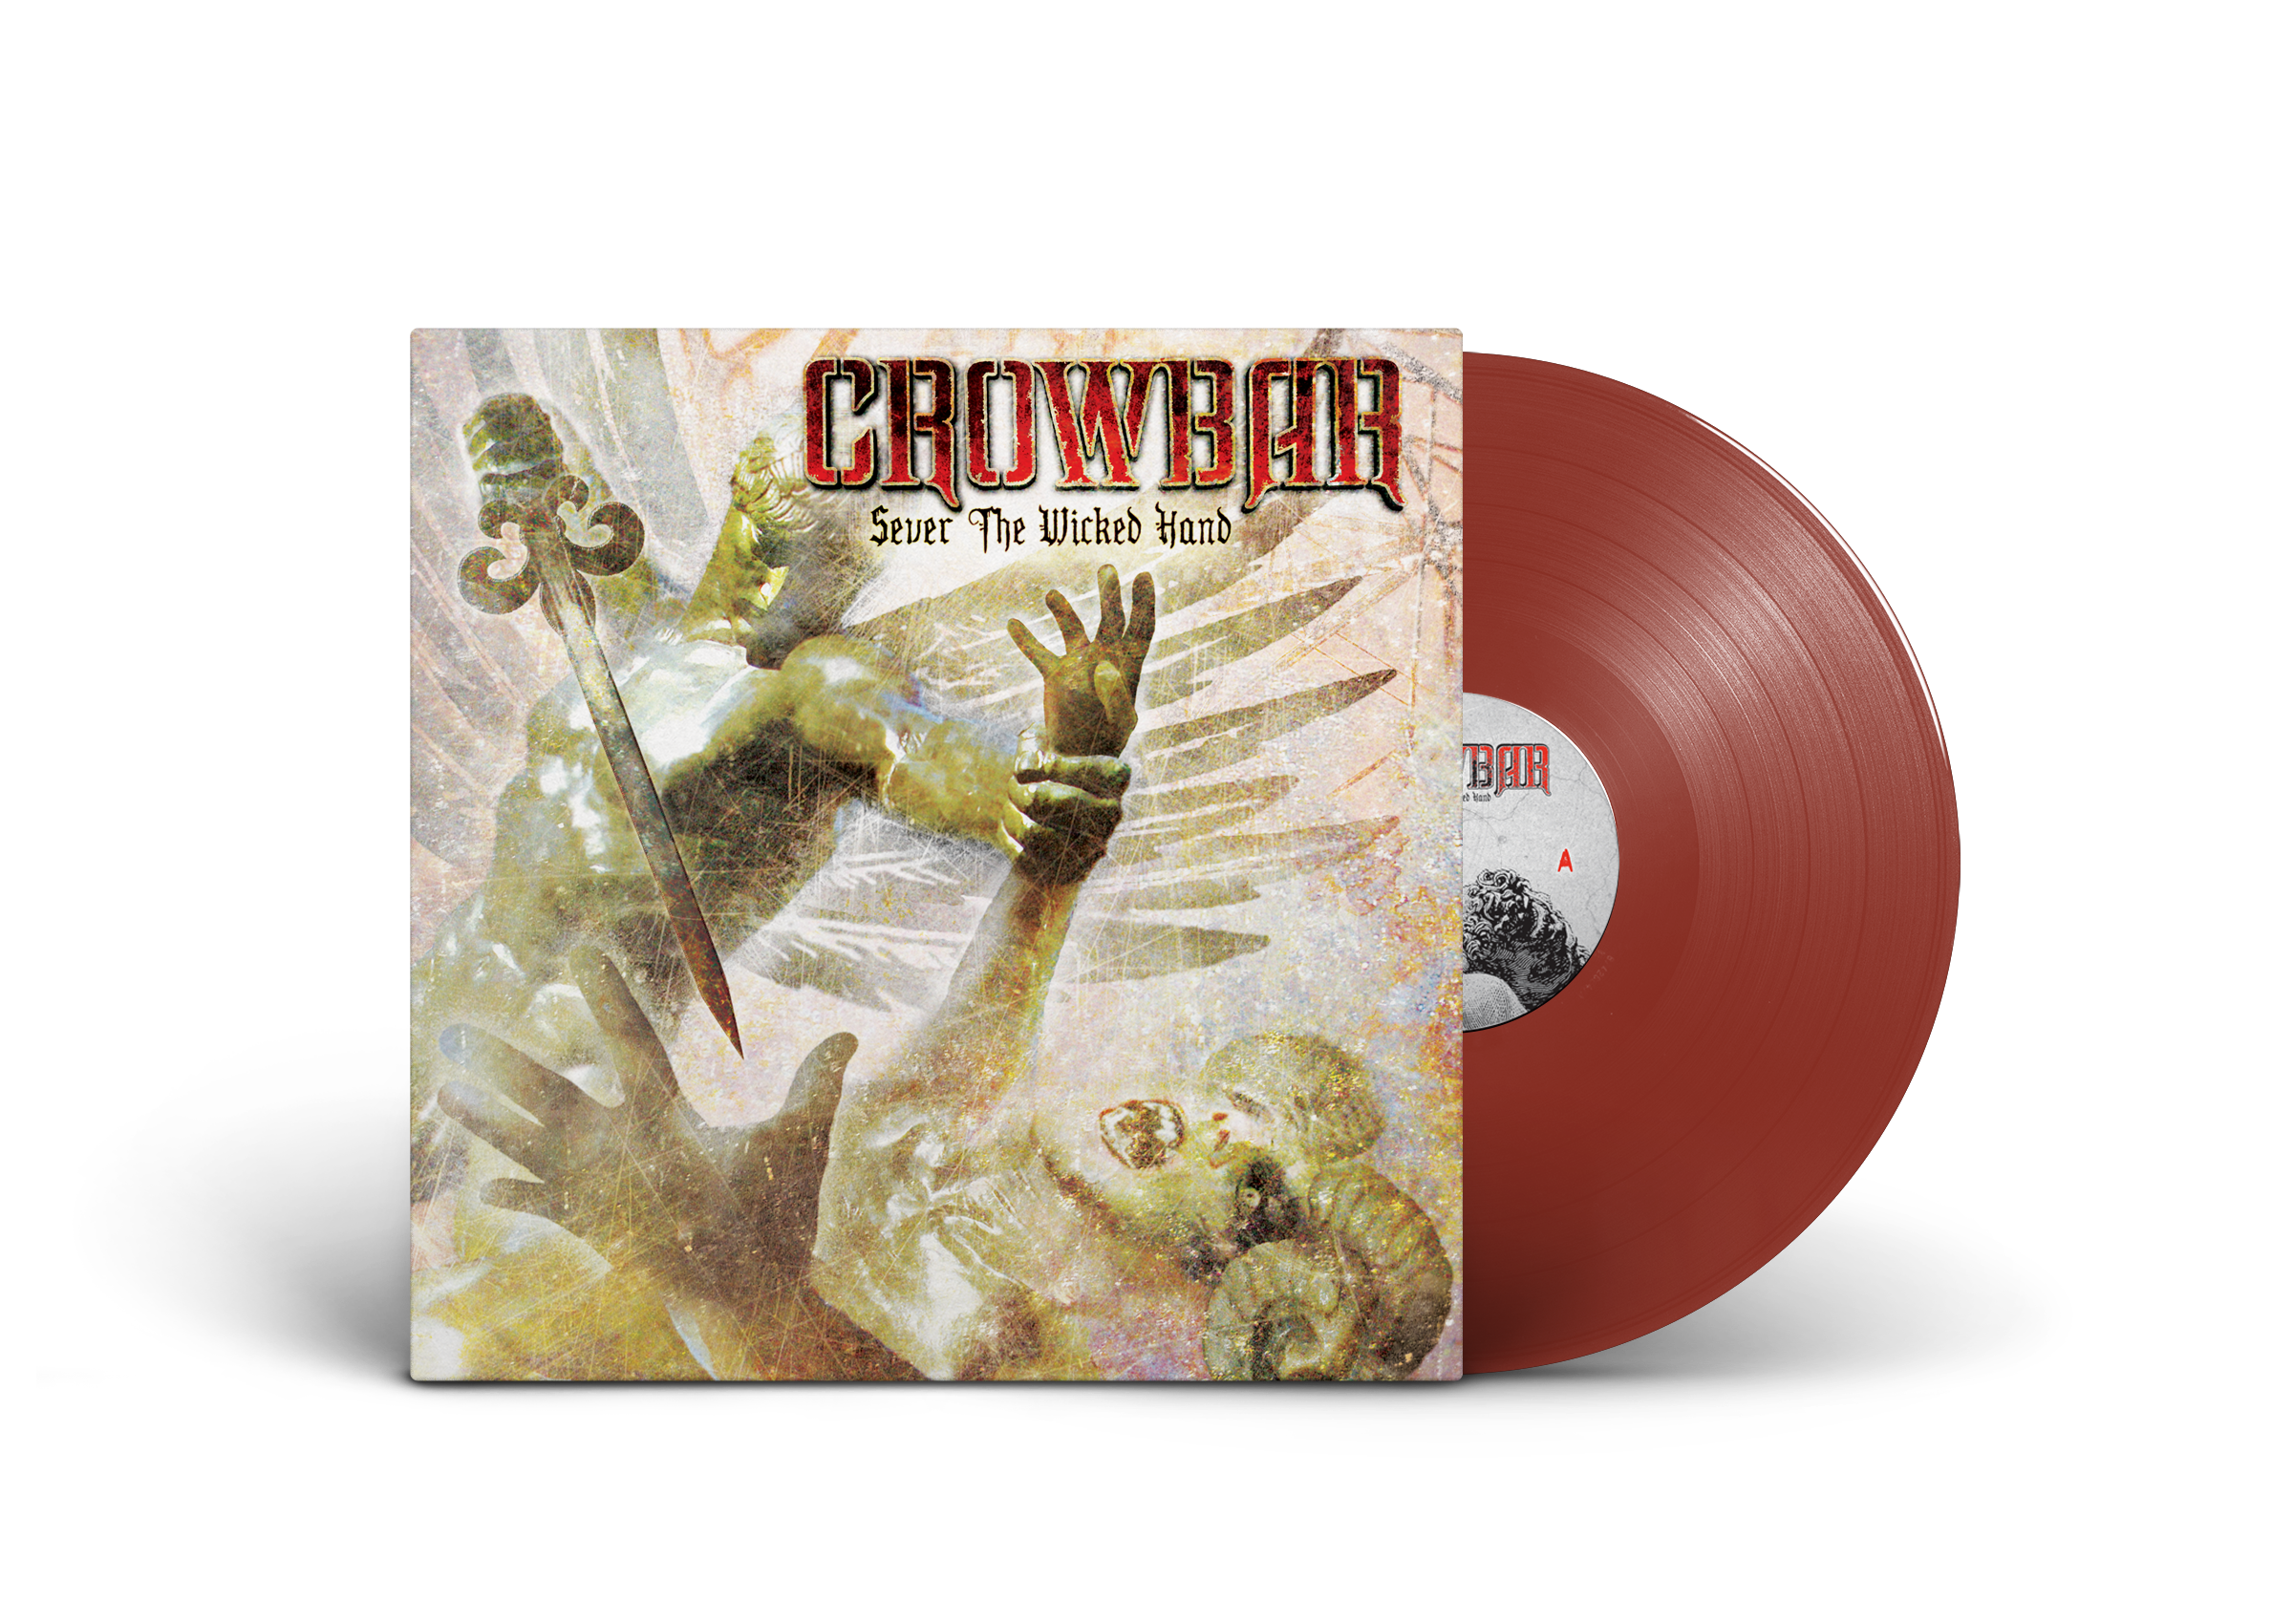 Crowbar - Sever The Wicked Hand; 2x 180Gramm Colored Vinyl (Opaque Apple Red) in Gatfold Sleeve with Generic Download Card